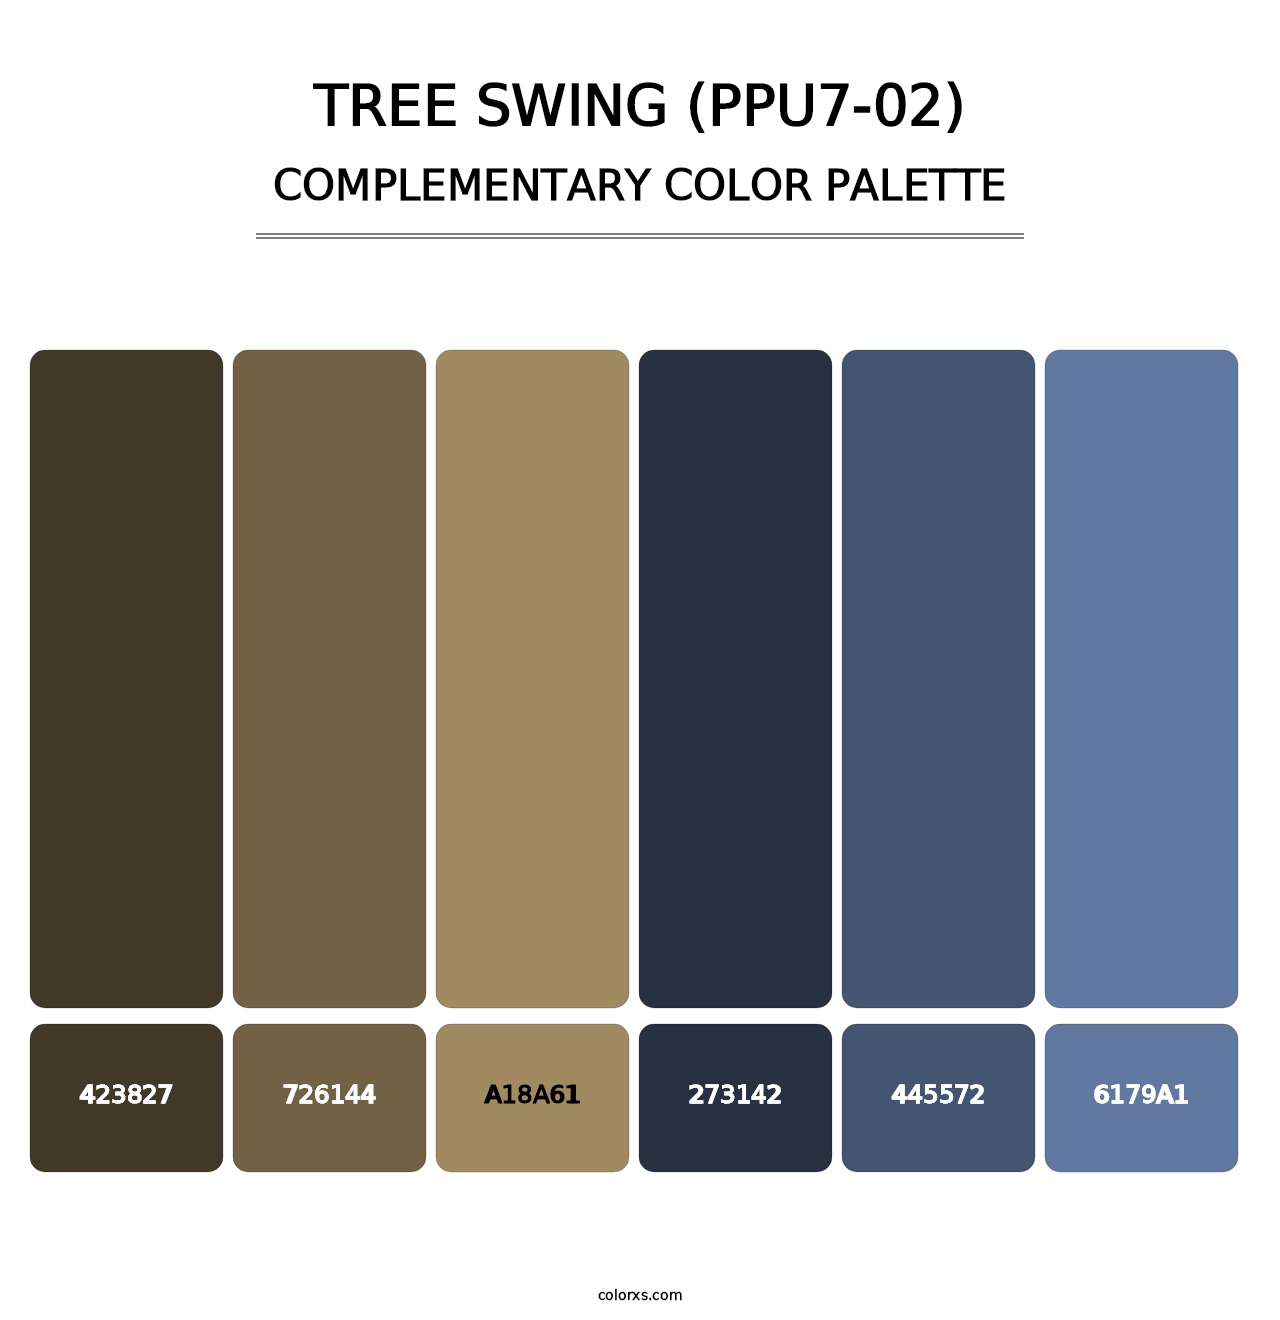 Tree Swing (PPU7-02) - Complementary Color Palette